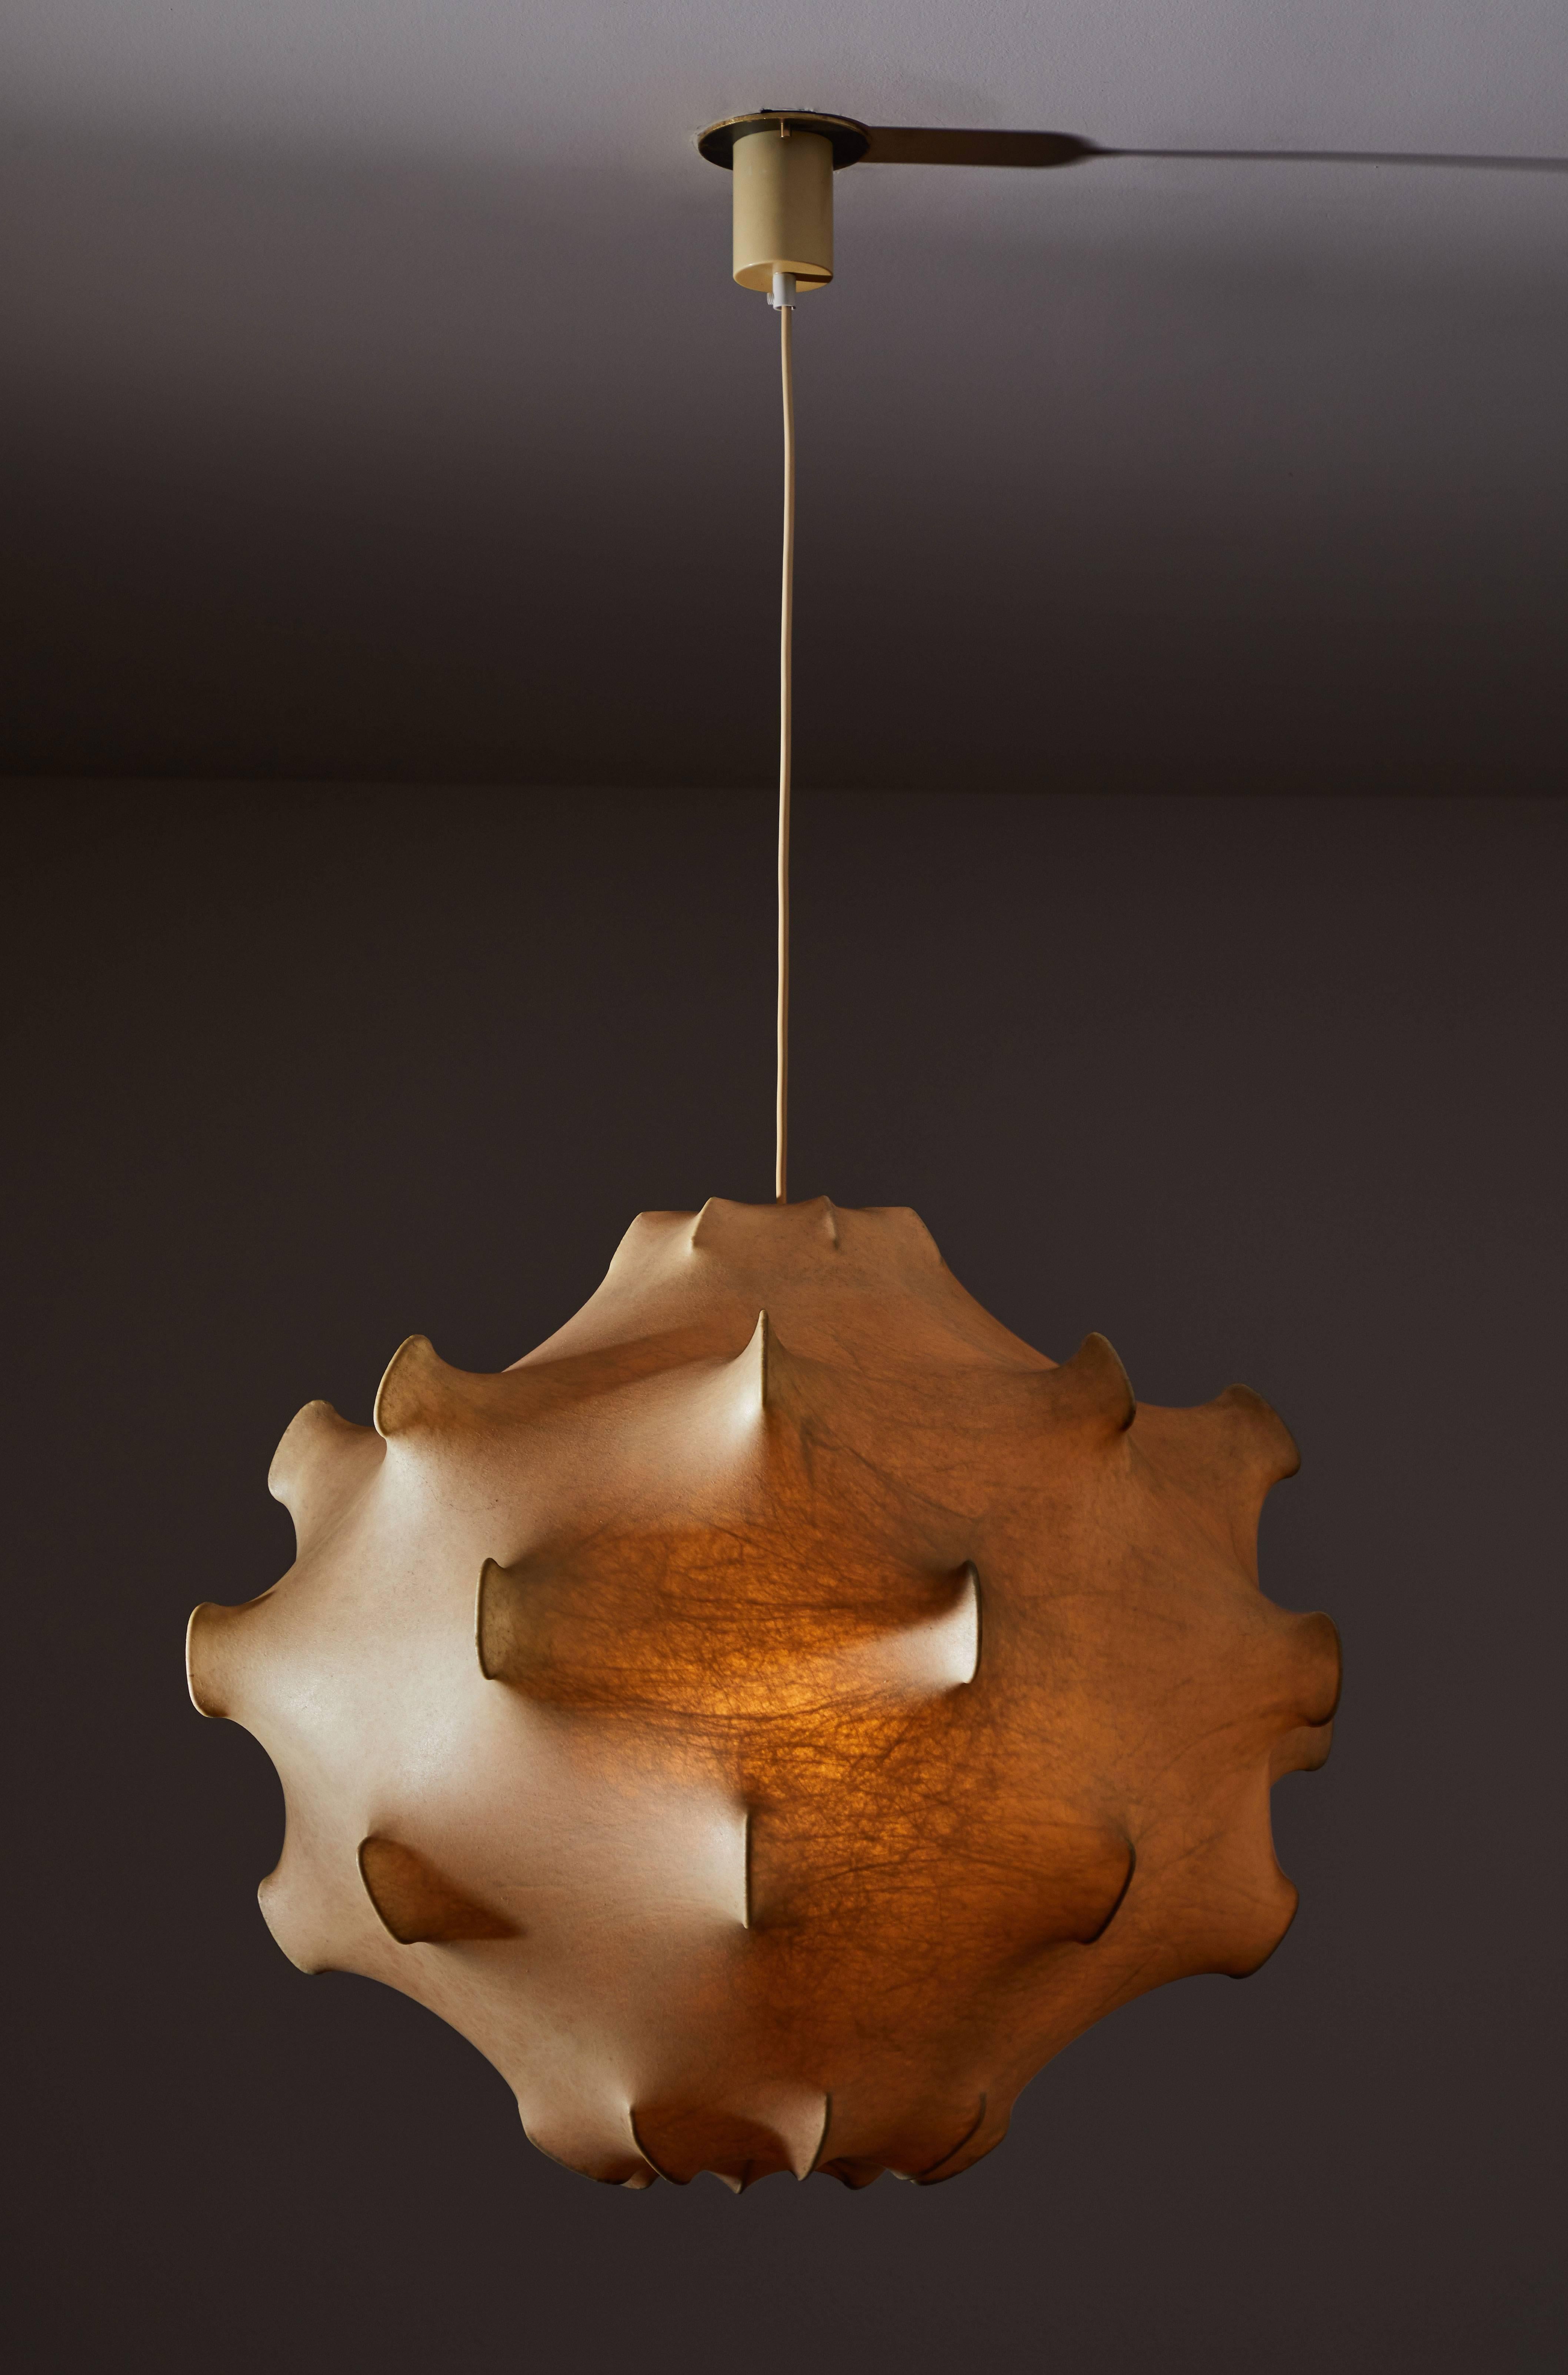 Taraxacum Suspension Light by Achille & Pier Giacomo Castiglioni for Flos. Designed and manufactured in Italy, circa 1960s. Plastic polymer resin applied with spraying technique on to enameled iron frame. Rewired for US junction boxes. Customized